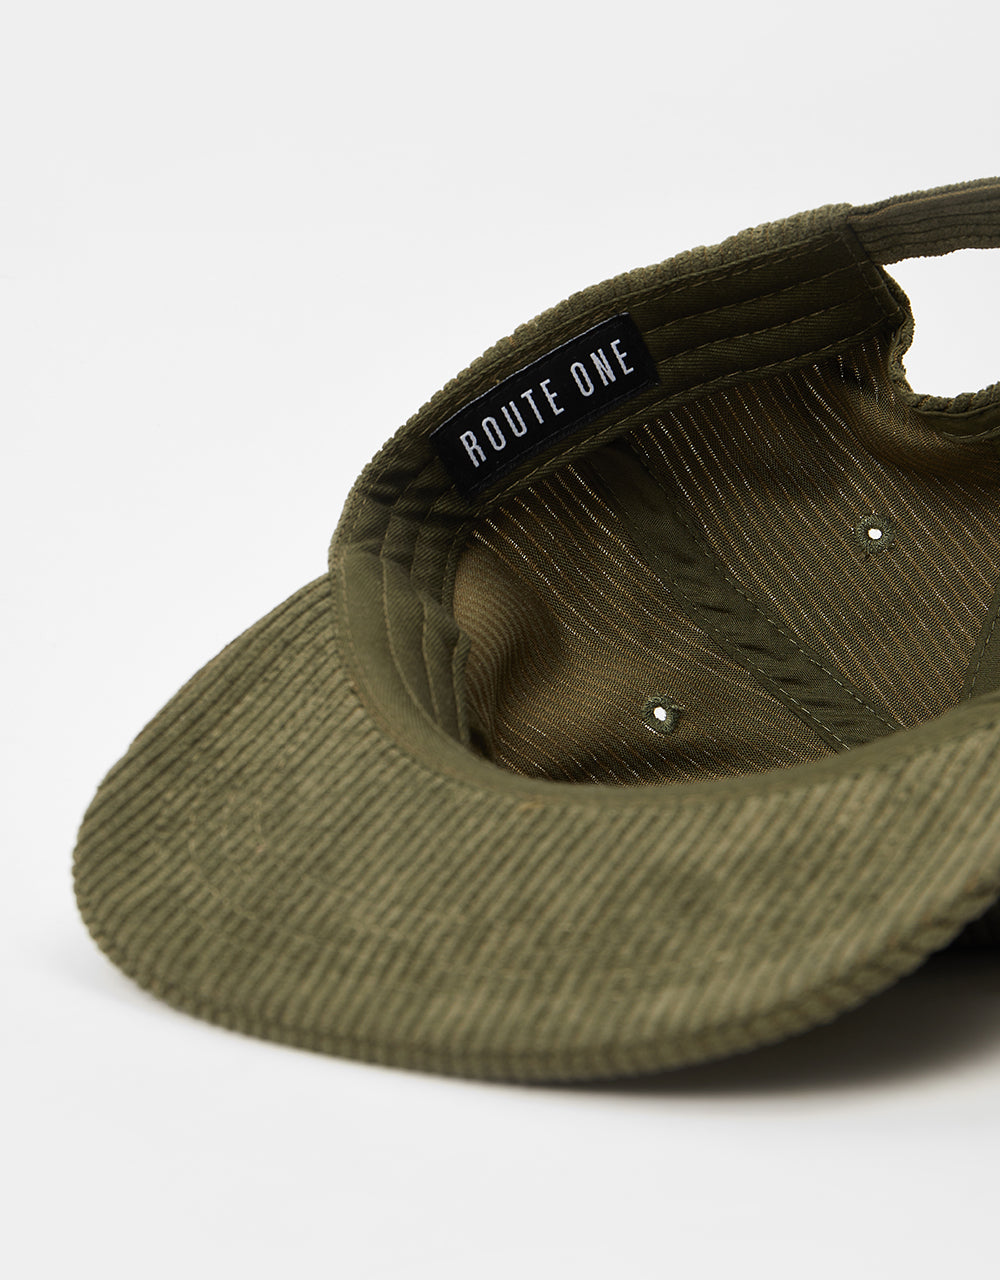 Route One Unstructured Cord 6 Panel Cap - Forest Green